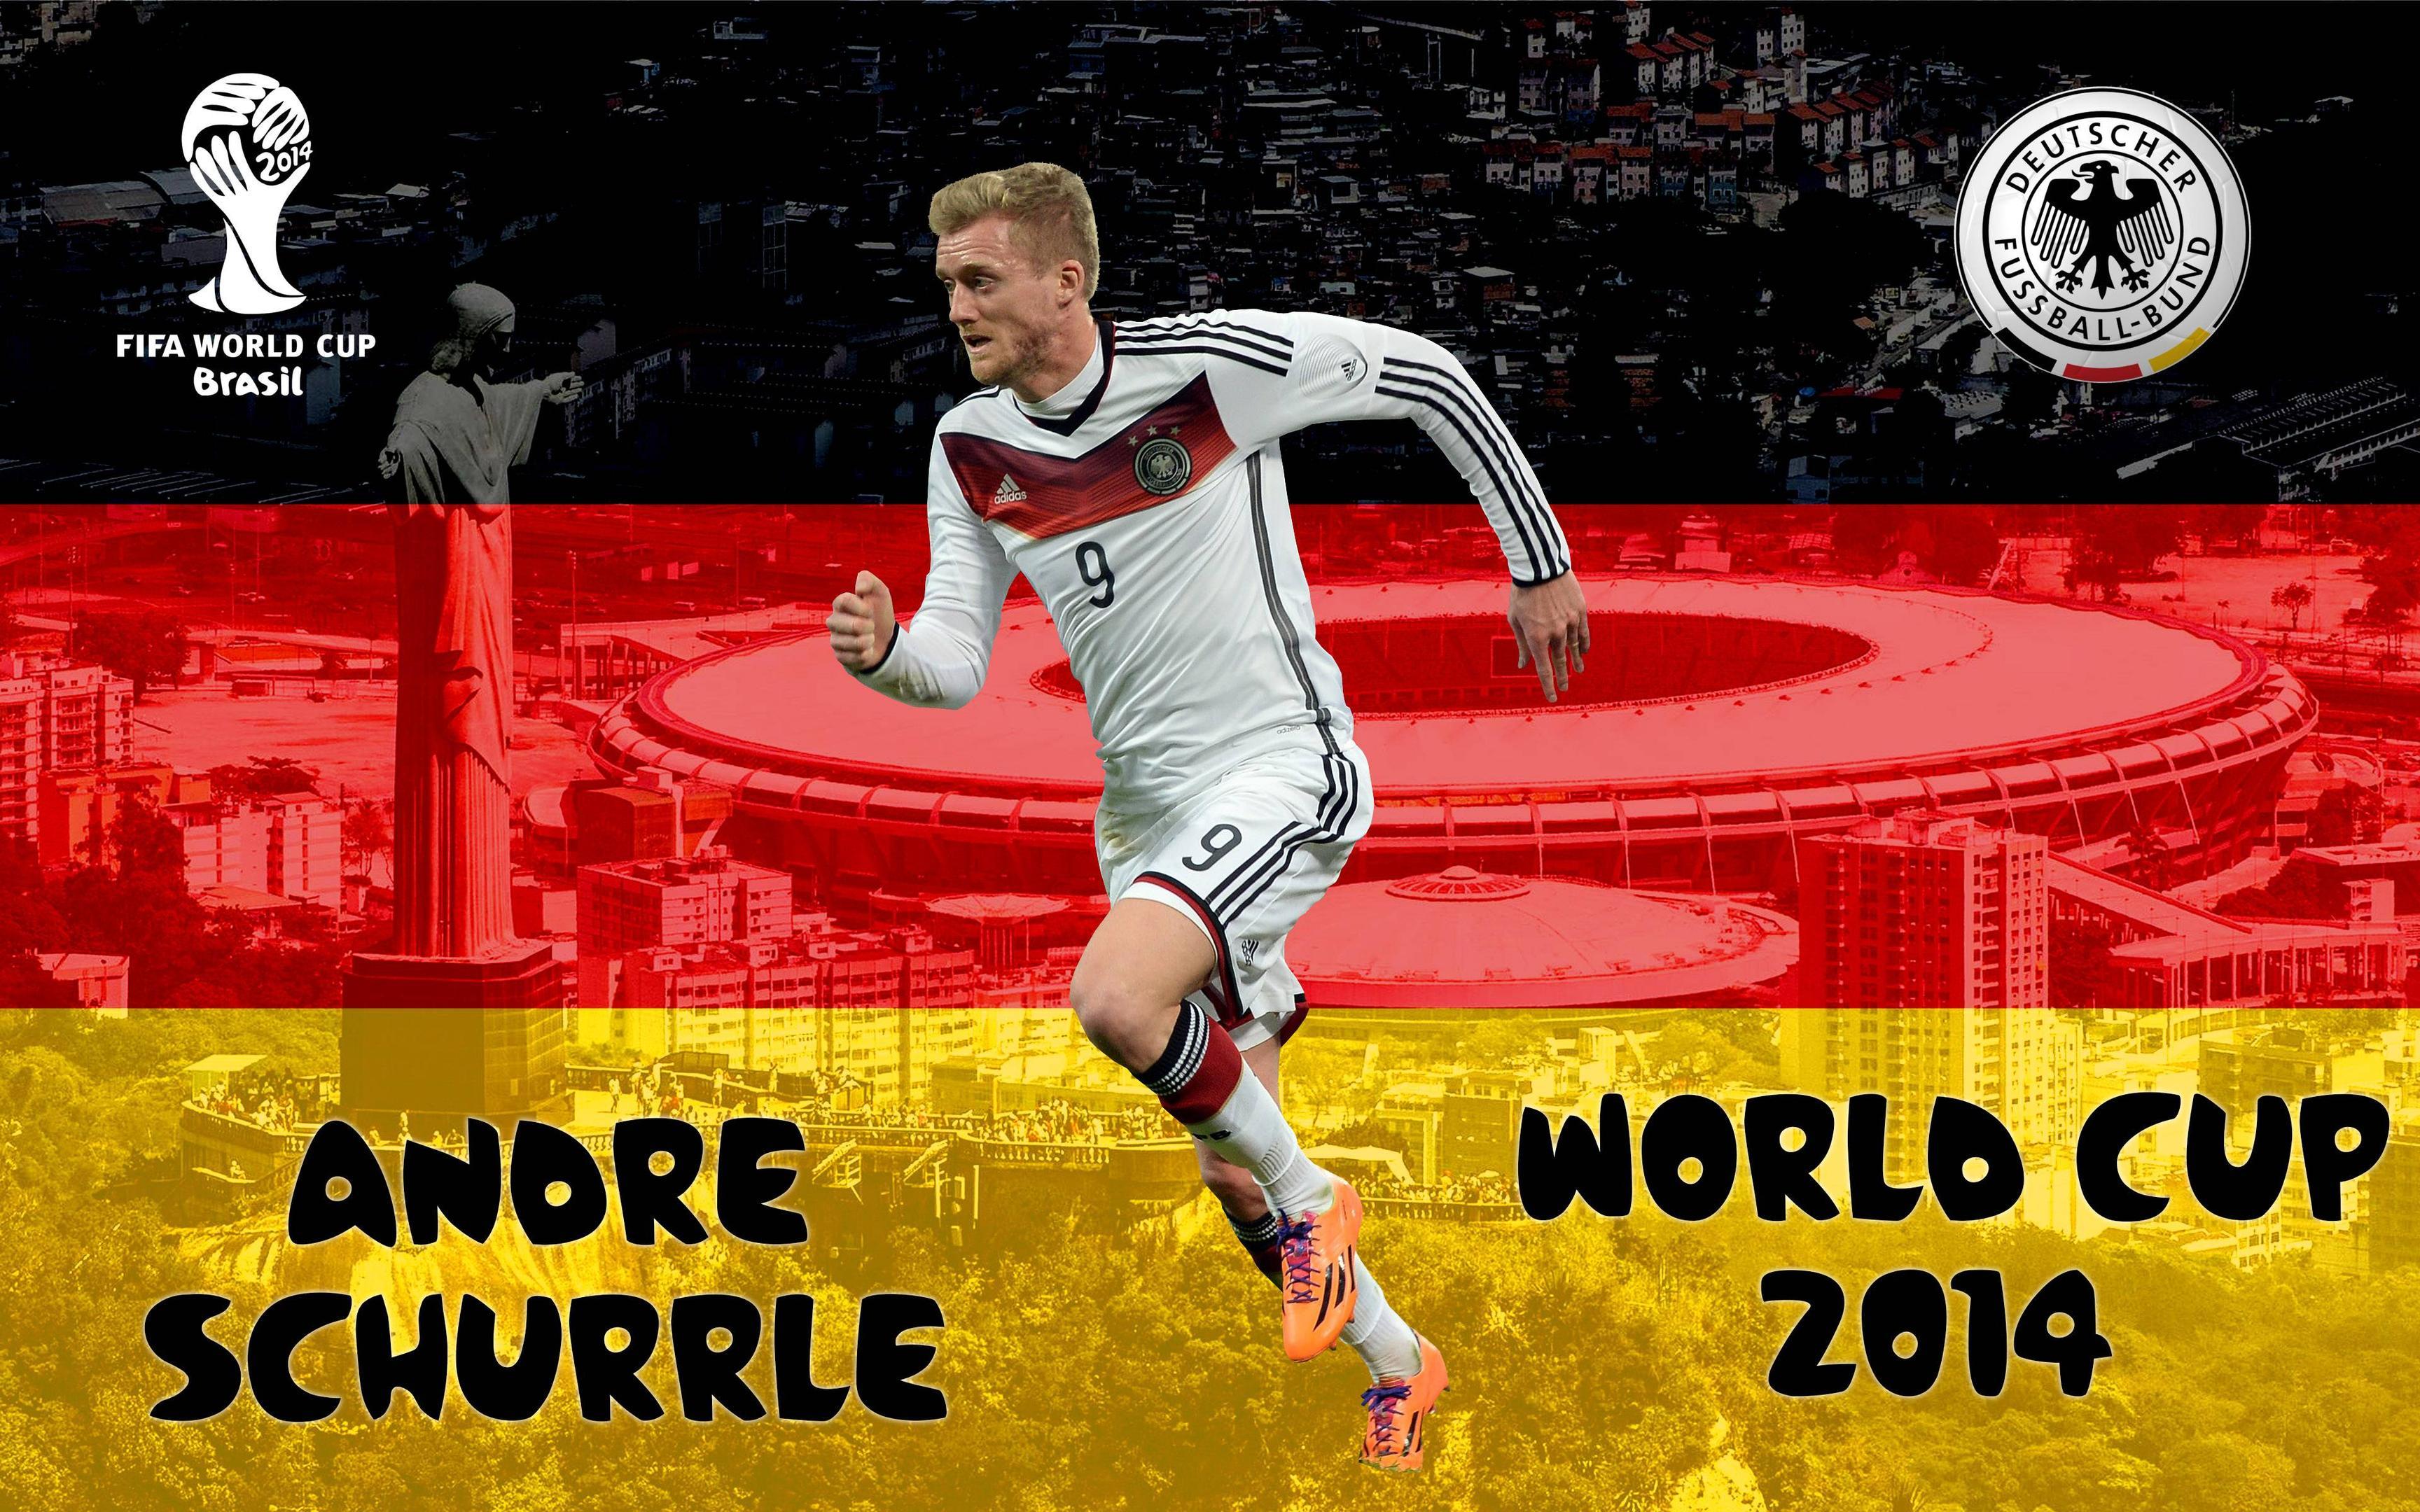 Andre Schurrle 2014 World Cup Germany Wallpaper Wide or HD. Male